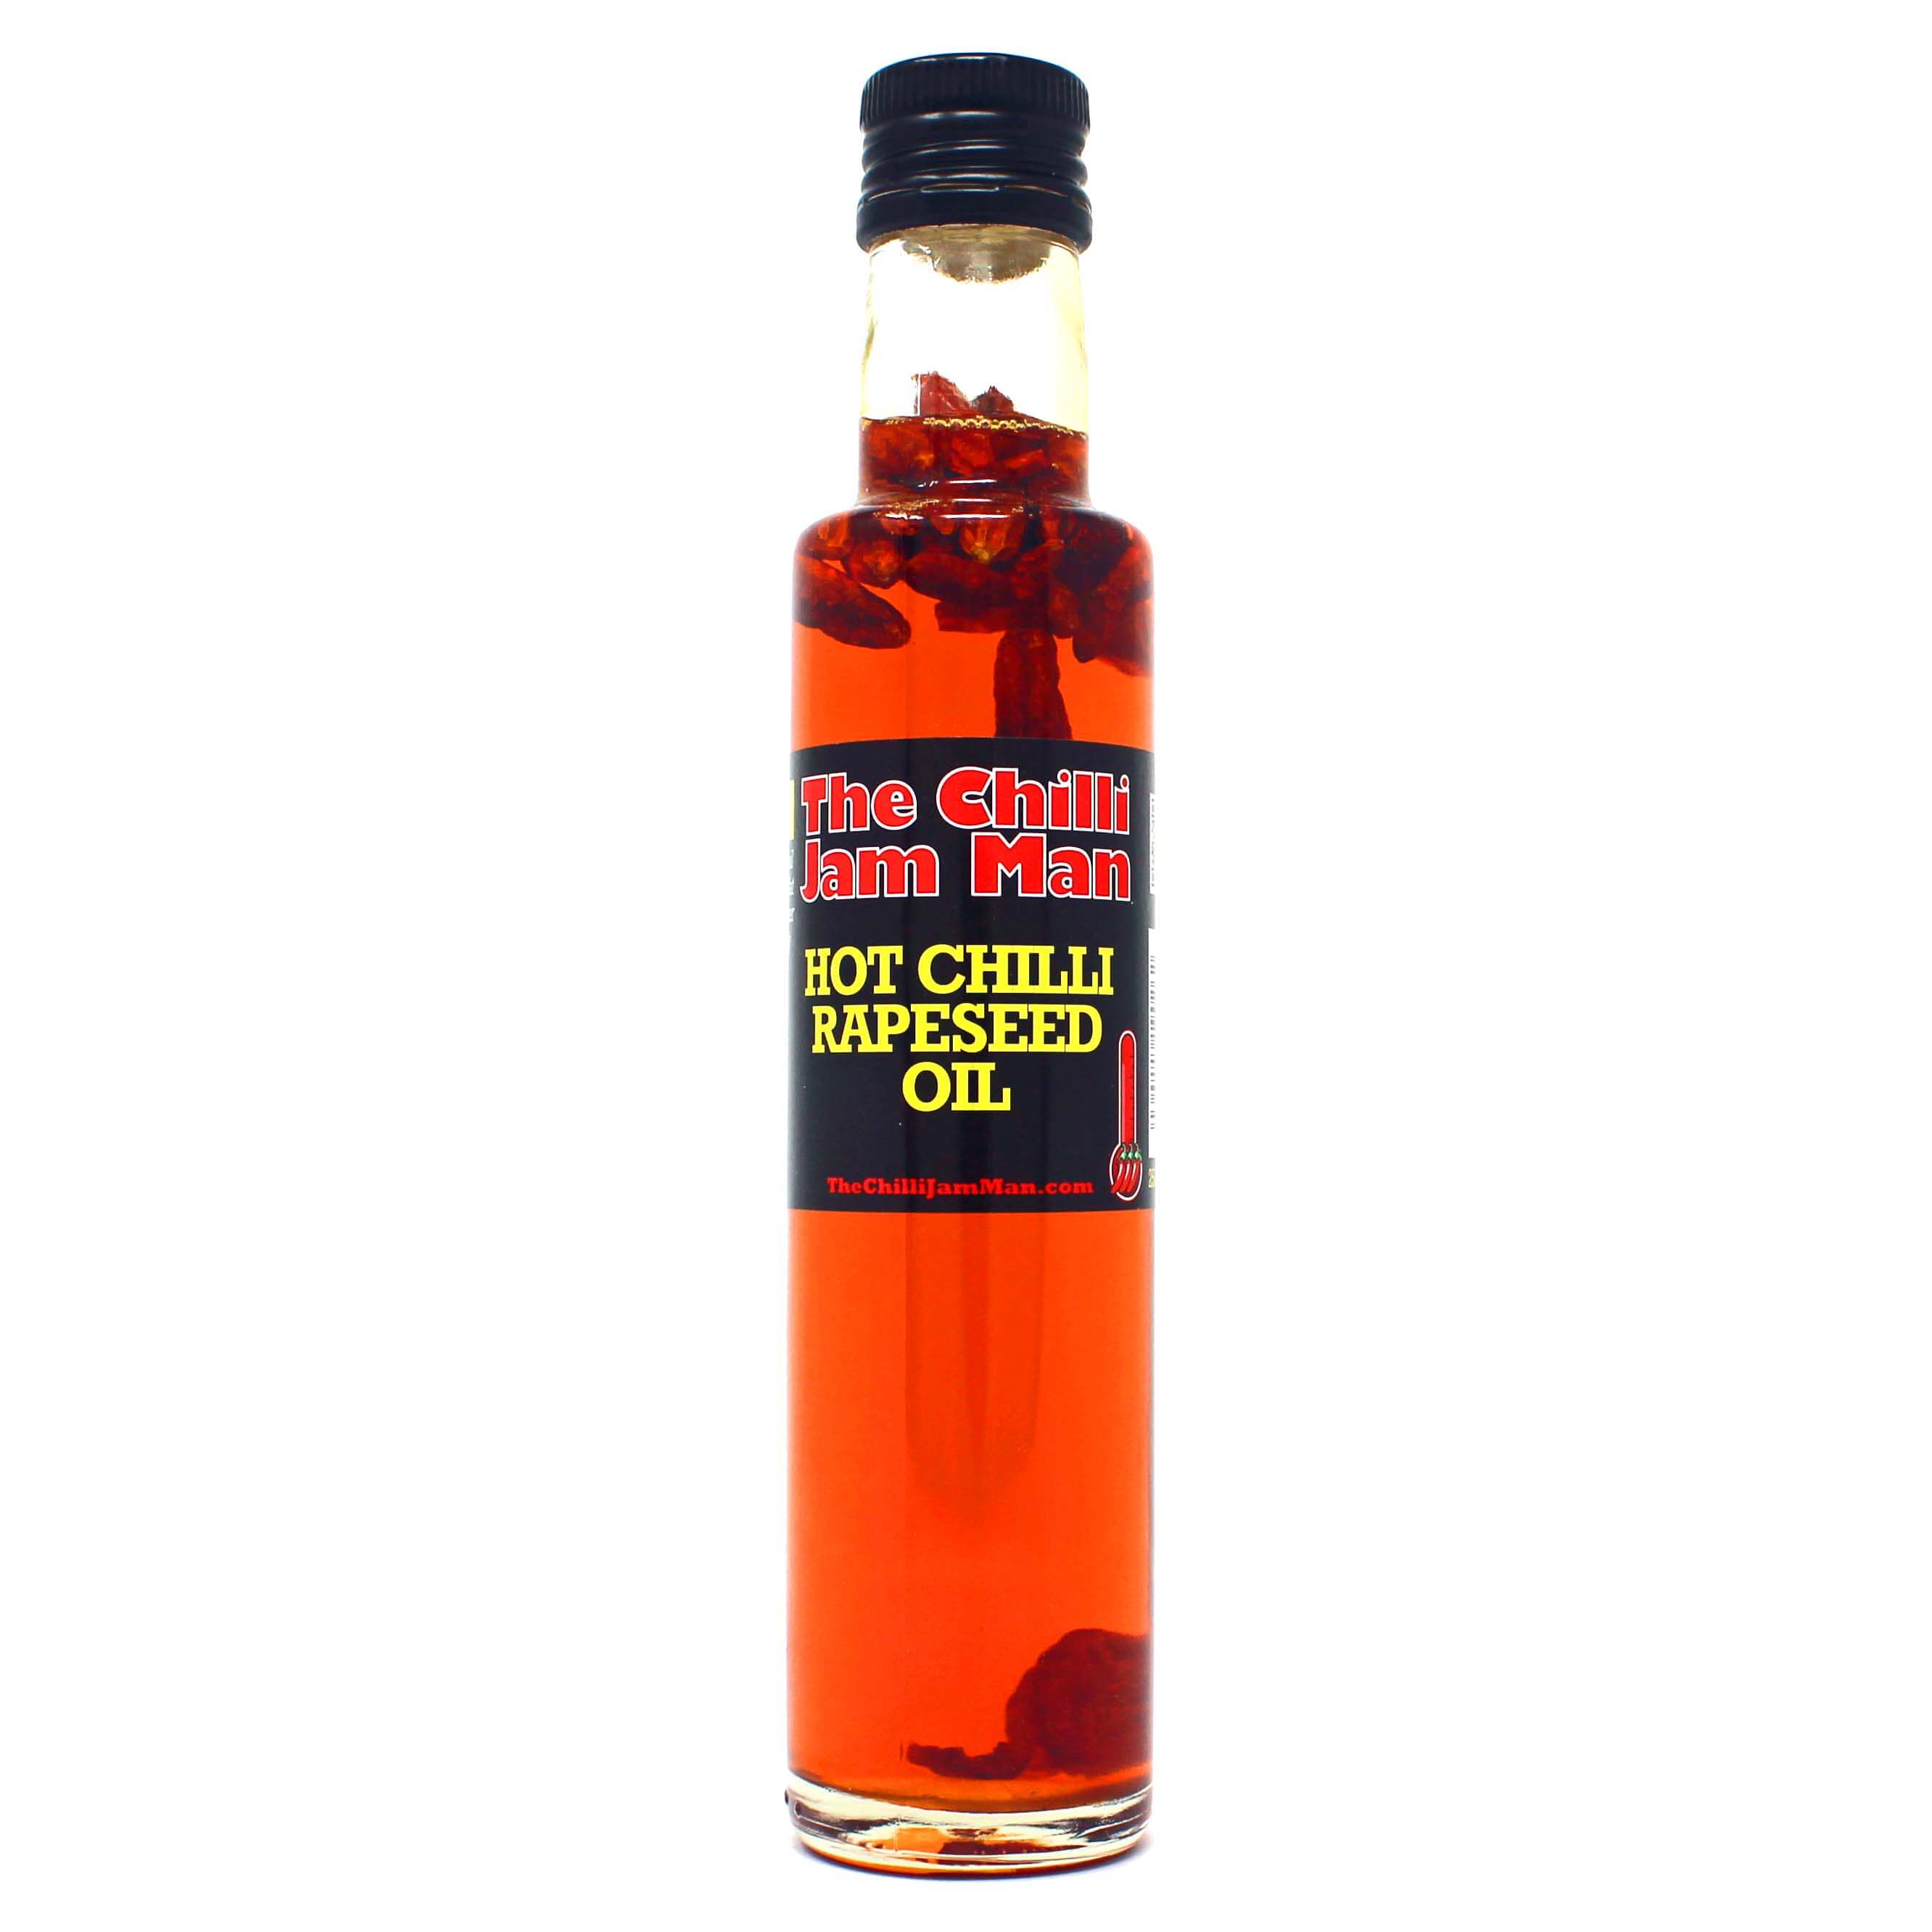 Image of Hot Chilli Rapeseed Oil made in the UK by The Chilli Jam Man. Buying this product supports a UK business, jobs and the local community